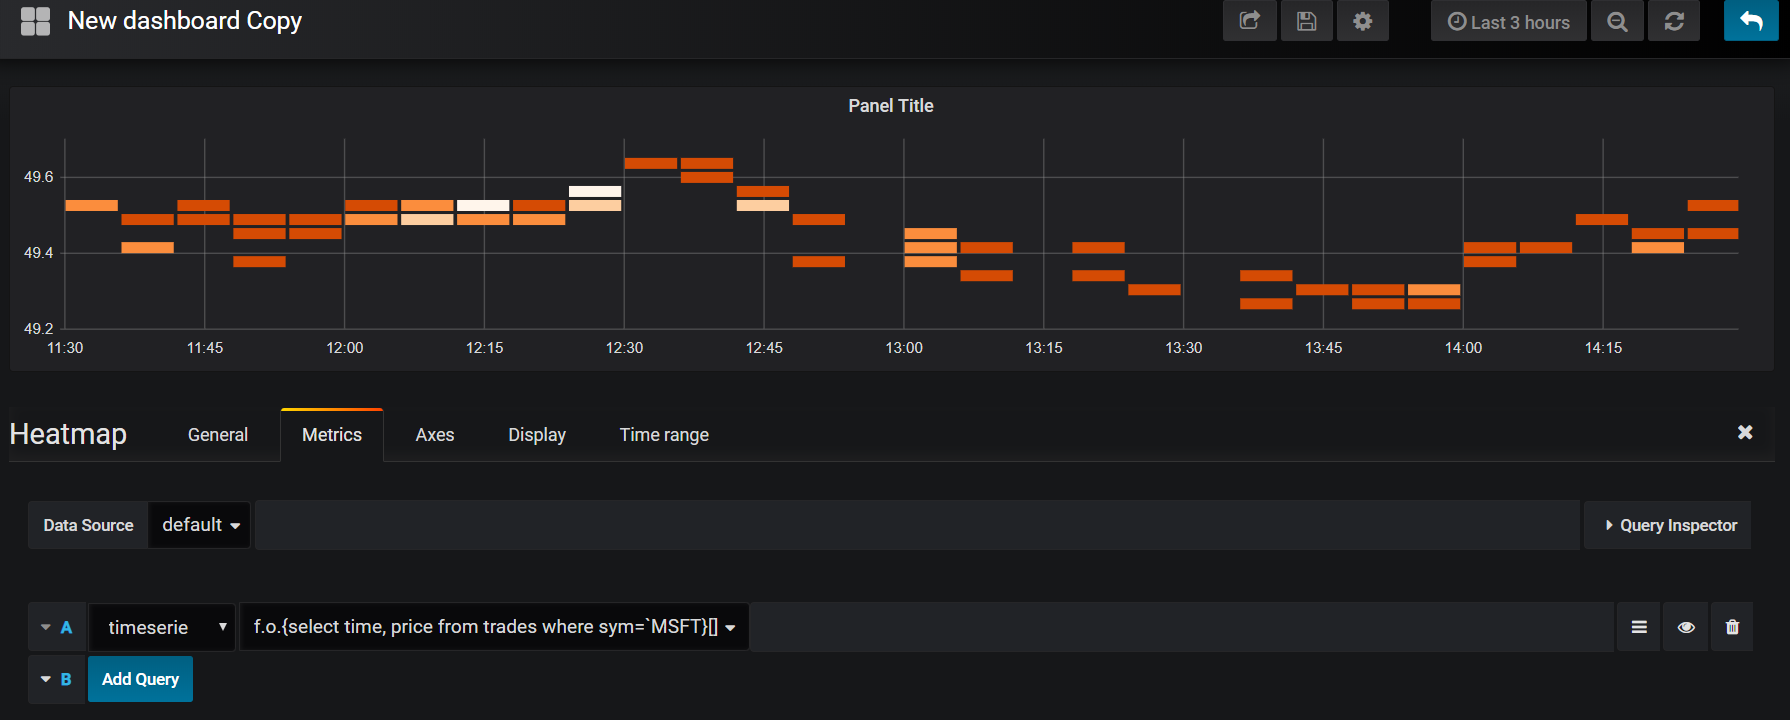 Grafana heatmap panel showing result of calling an anonymous function. The graph shows the frequency of MSFT trades at a range of prices during the day.